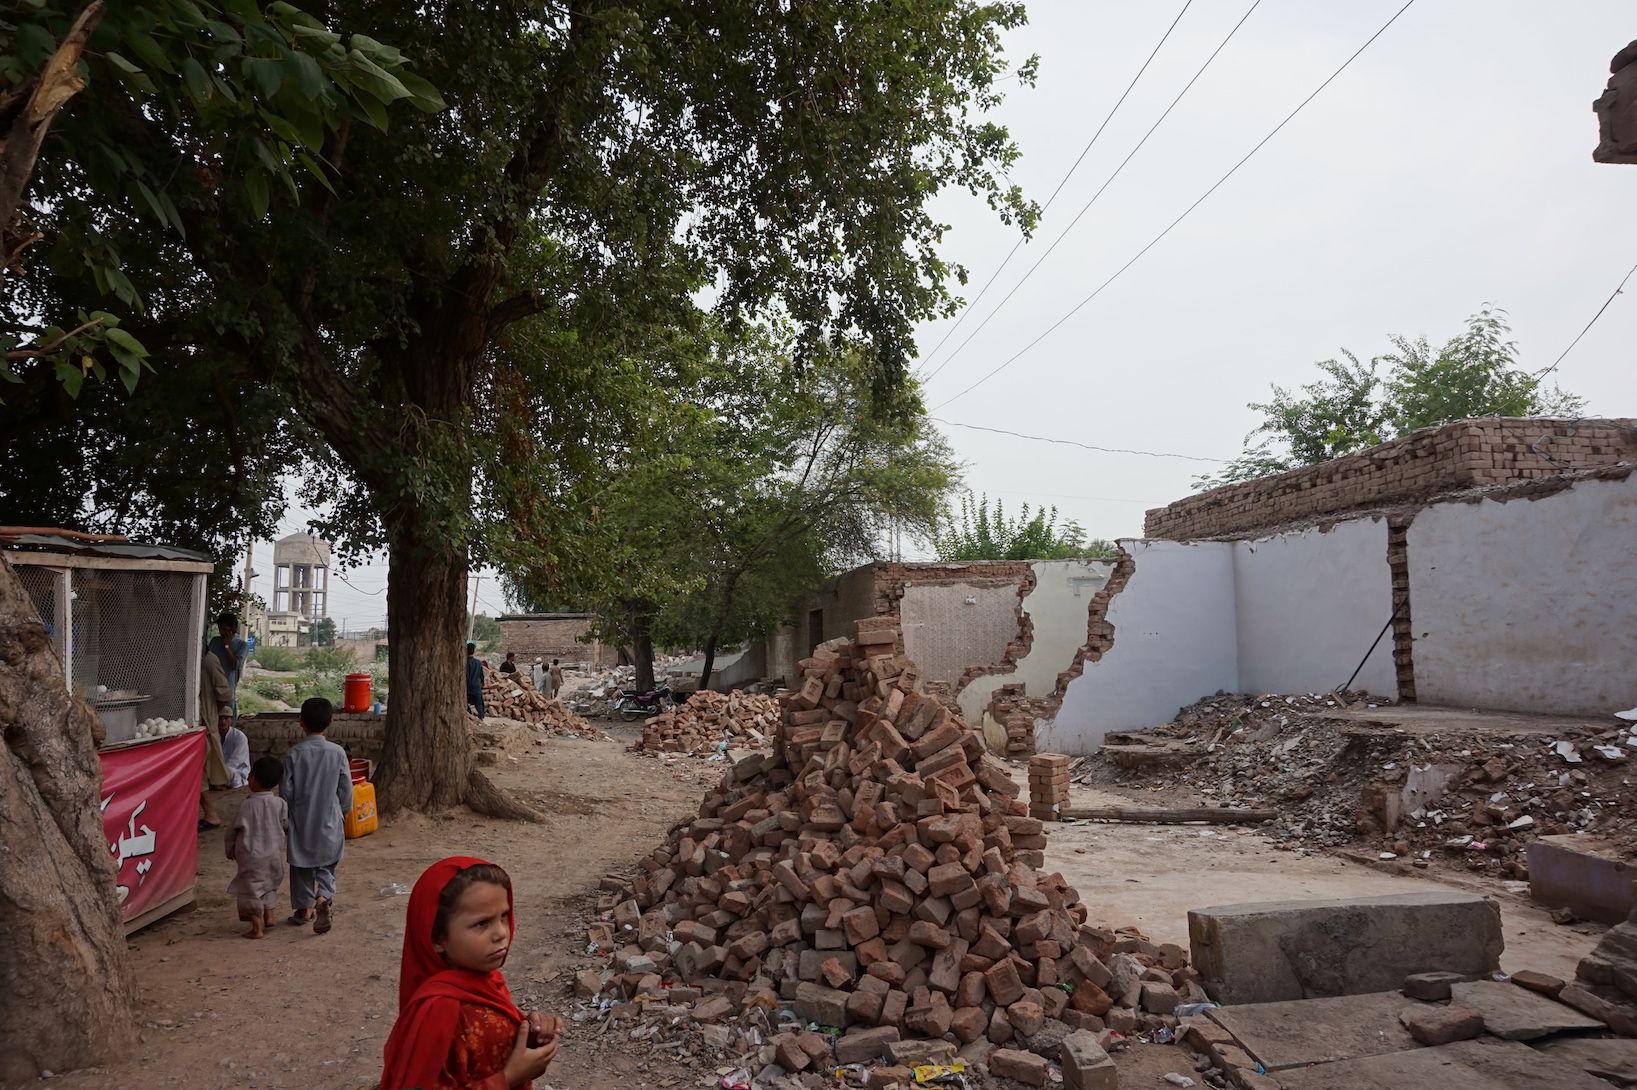 A child watches as a row of shops is demolished by authorities for collective punishment in Khyber Agency, in the Federally Administered Tribal Areas. Image by Umar Farooq. Pakistan, 2017.